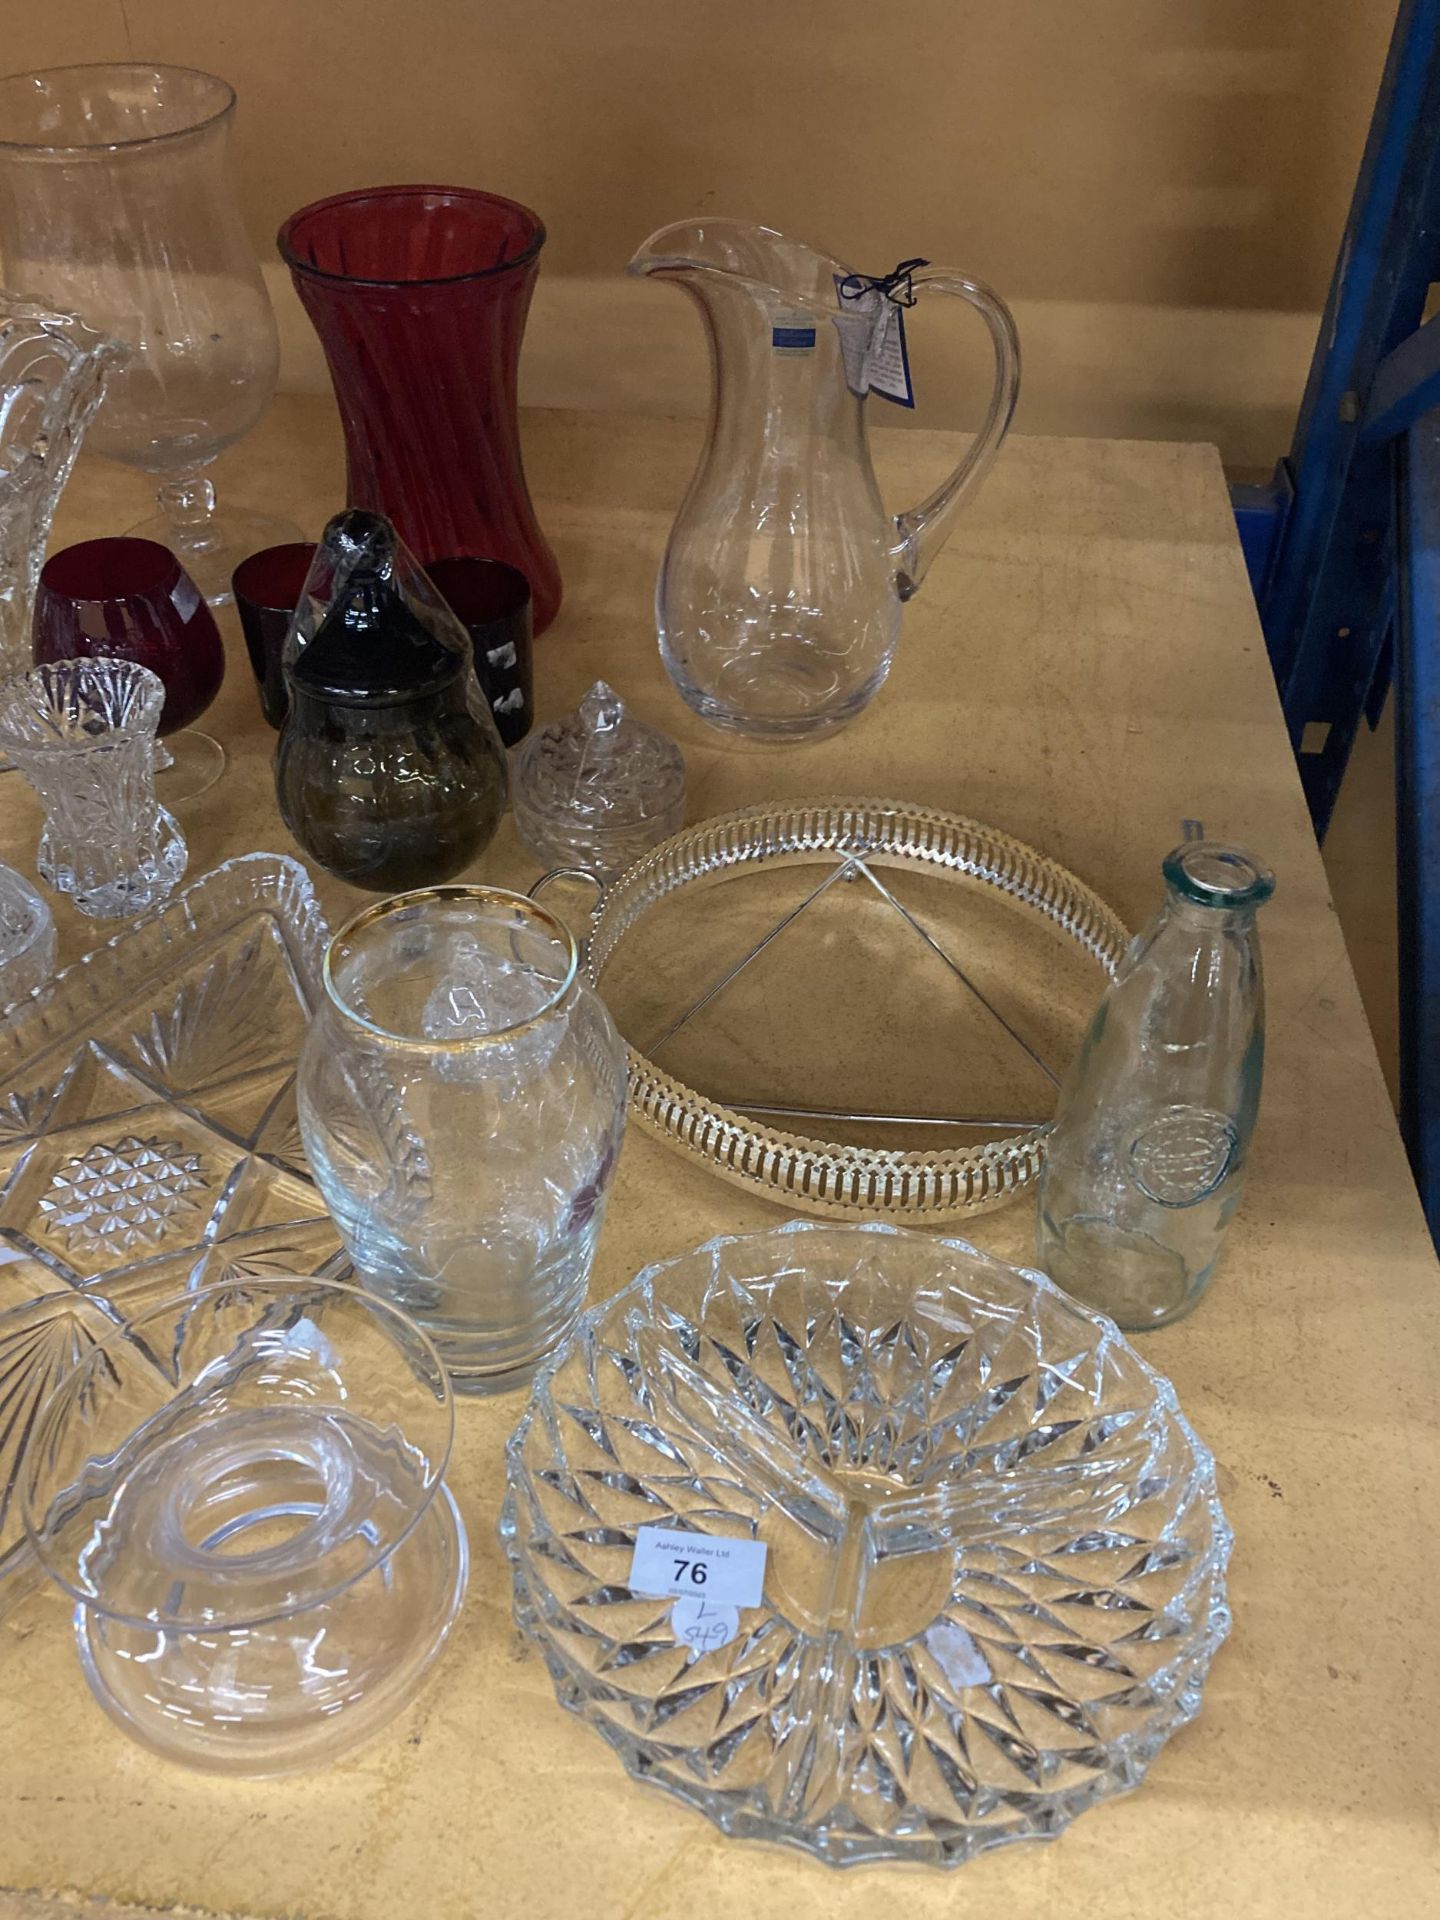 A MIXED COLLECTION OF GLASSWARE, CRANBERRY GLASS ITEMS ETC - Image 4 of 4